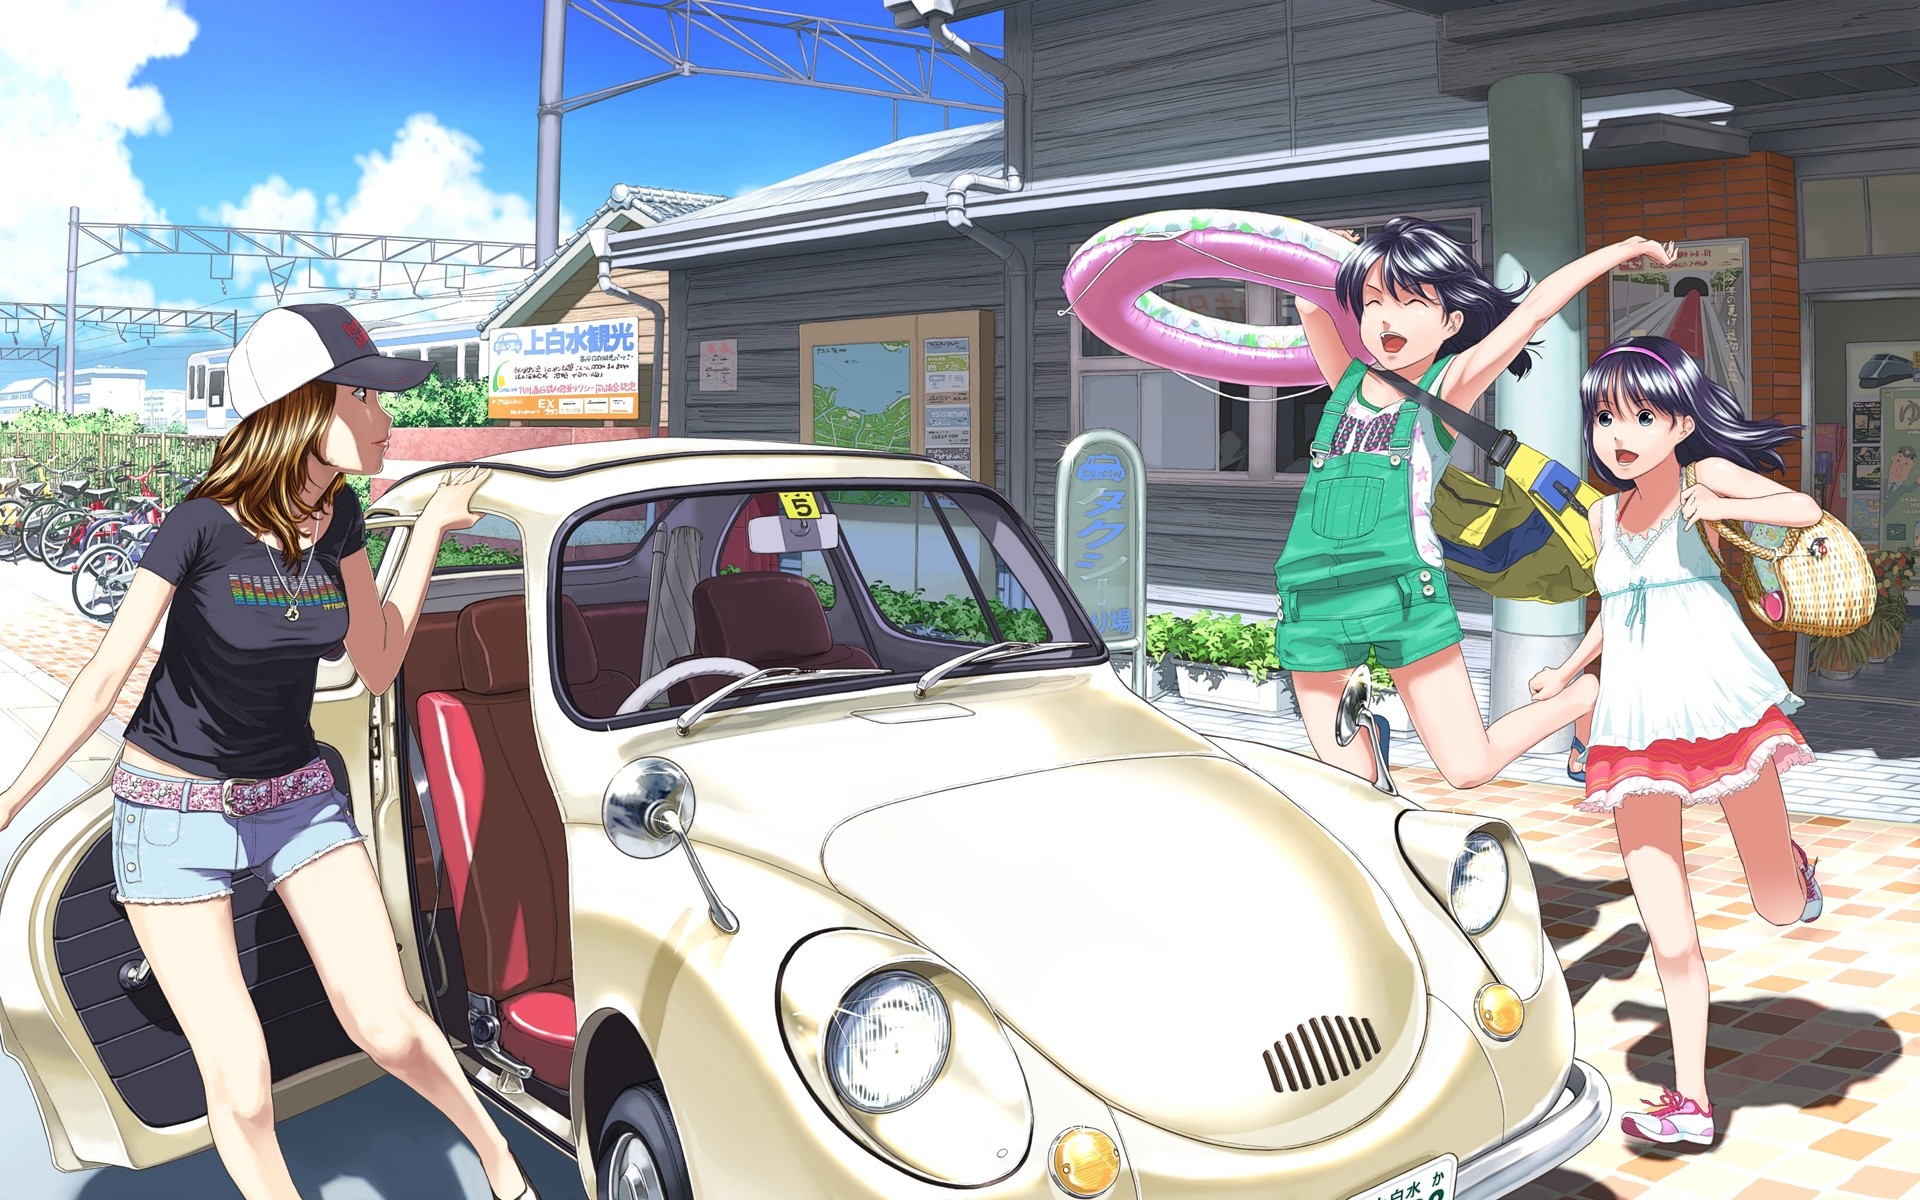 Anime 1920x1200 anime car original characters anime girls women with cars vehicle women trio hat necklace skirt jean shorts brunette arms up urban women outdoors women